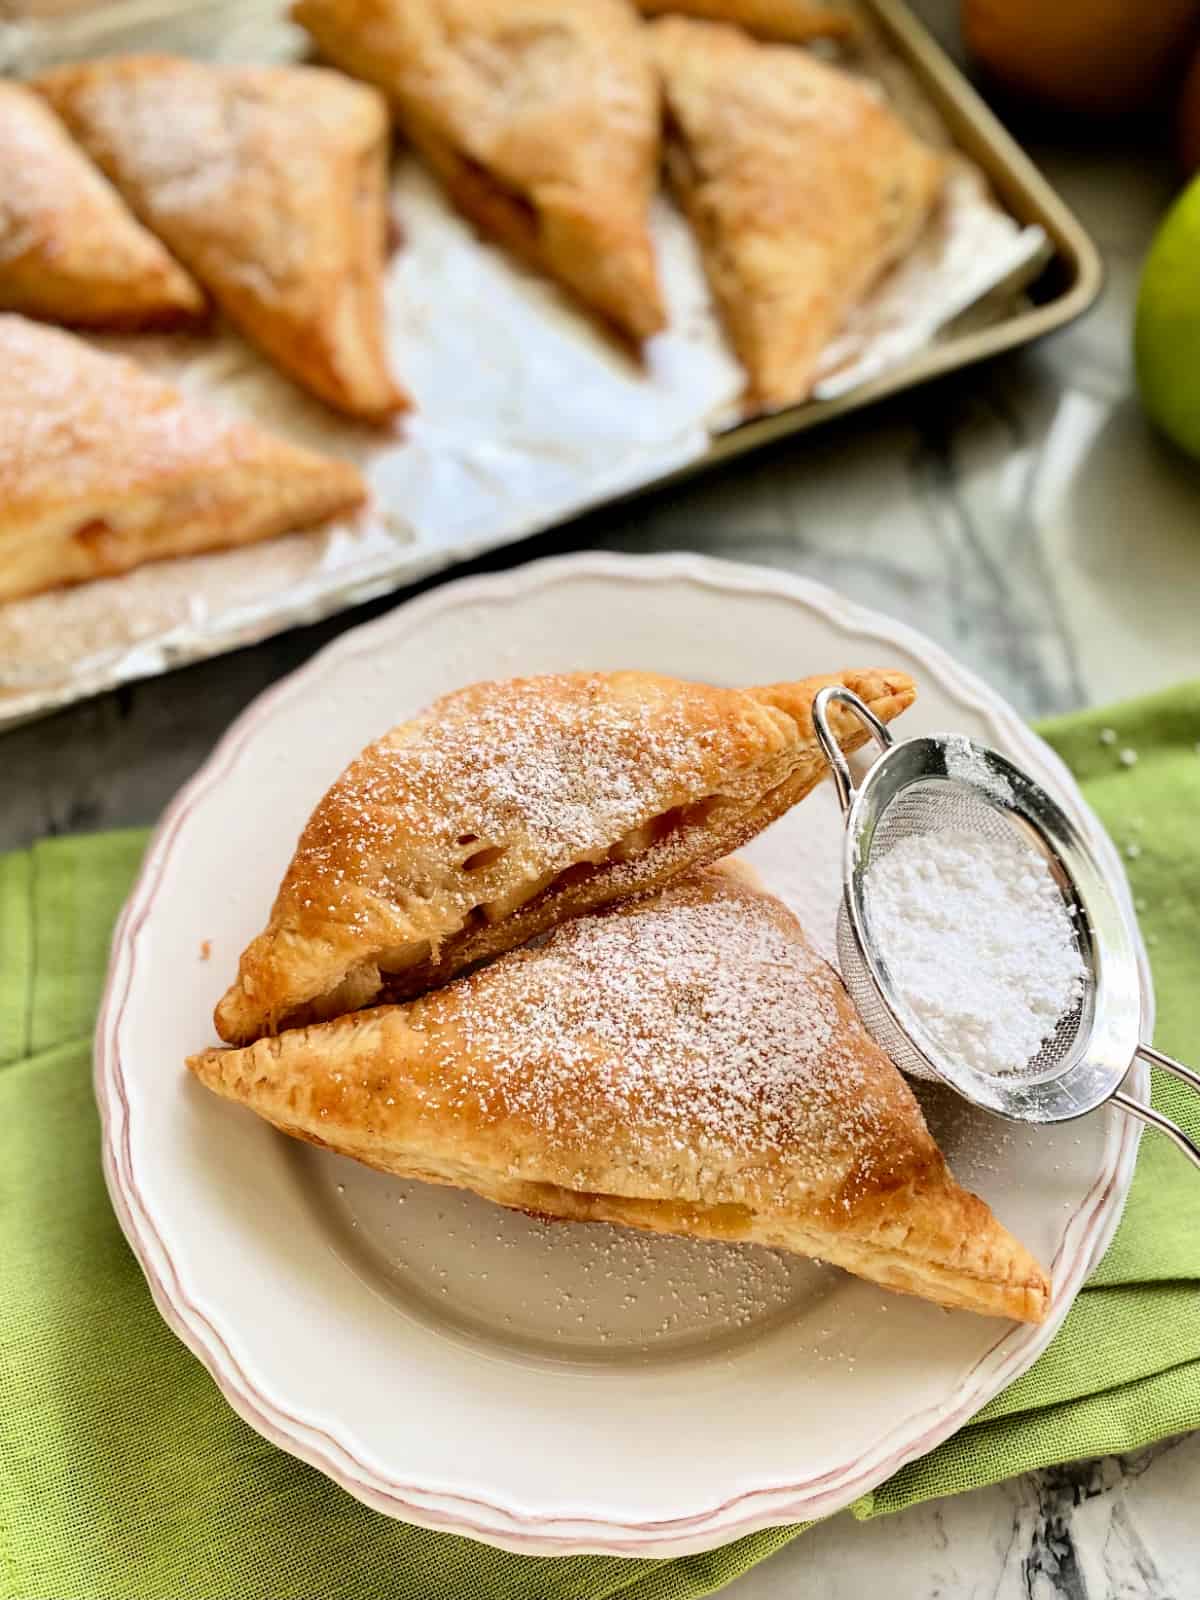 Top view of a white plate filled with apple turnovers and a mesh sifter filled with powder sugar.